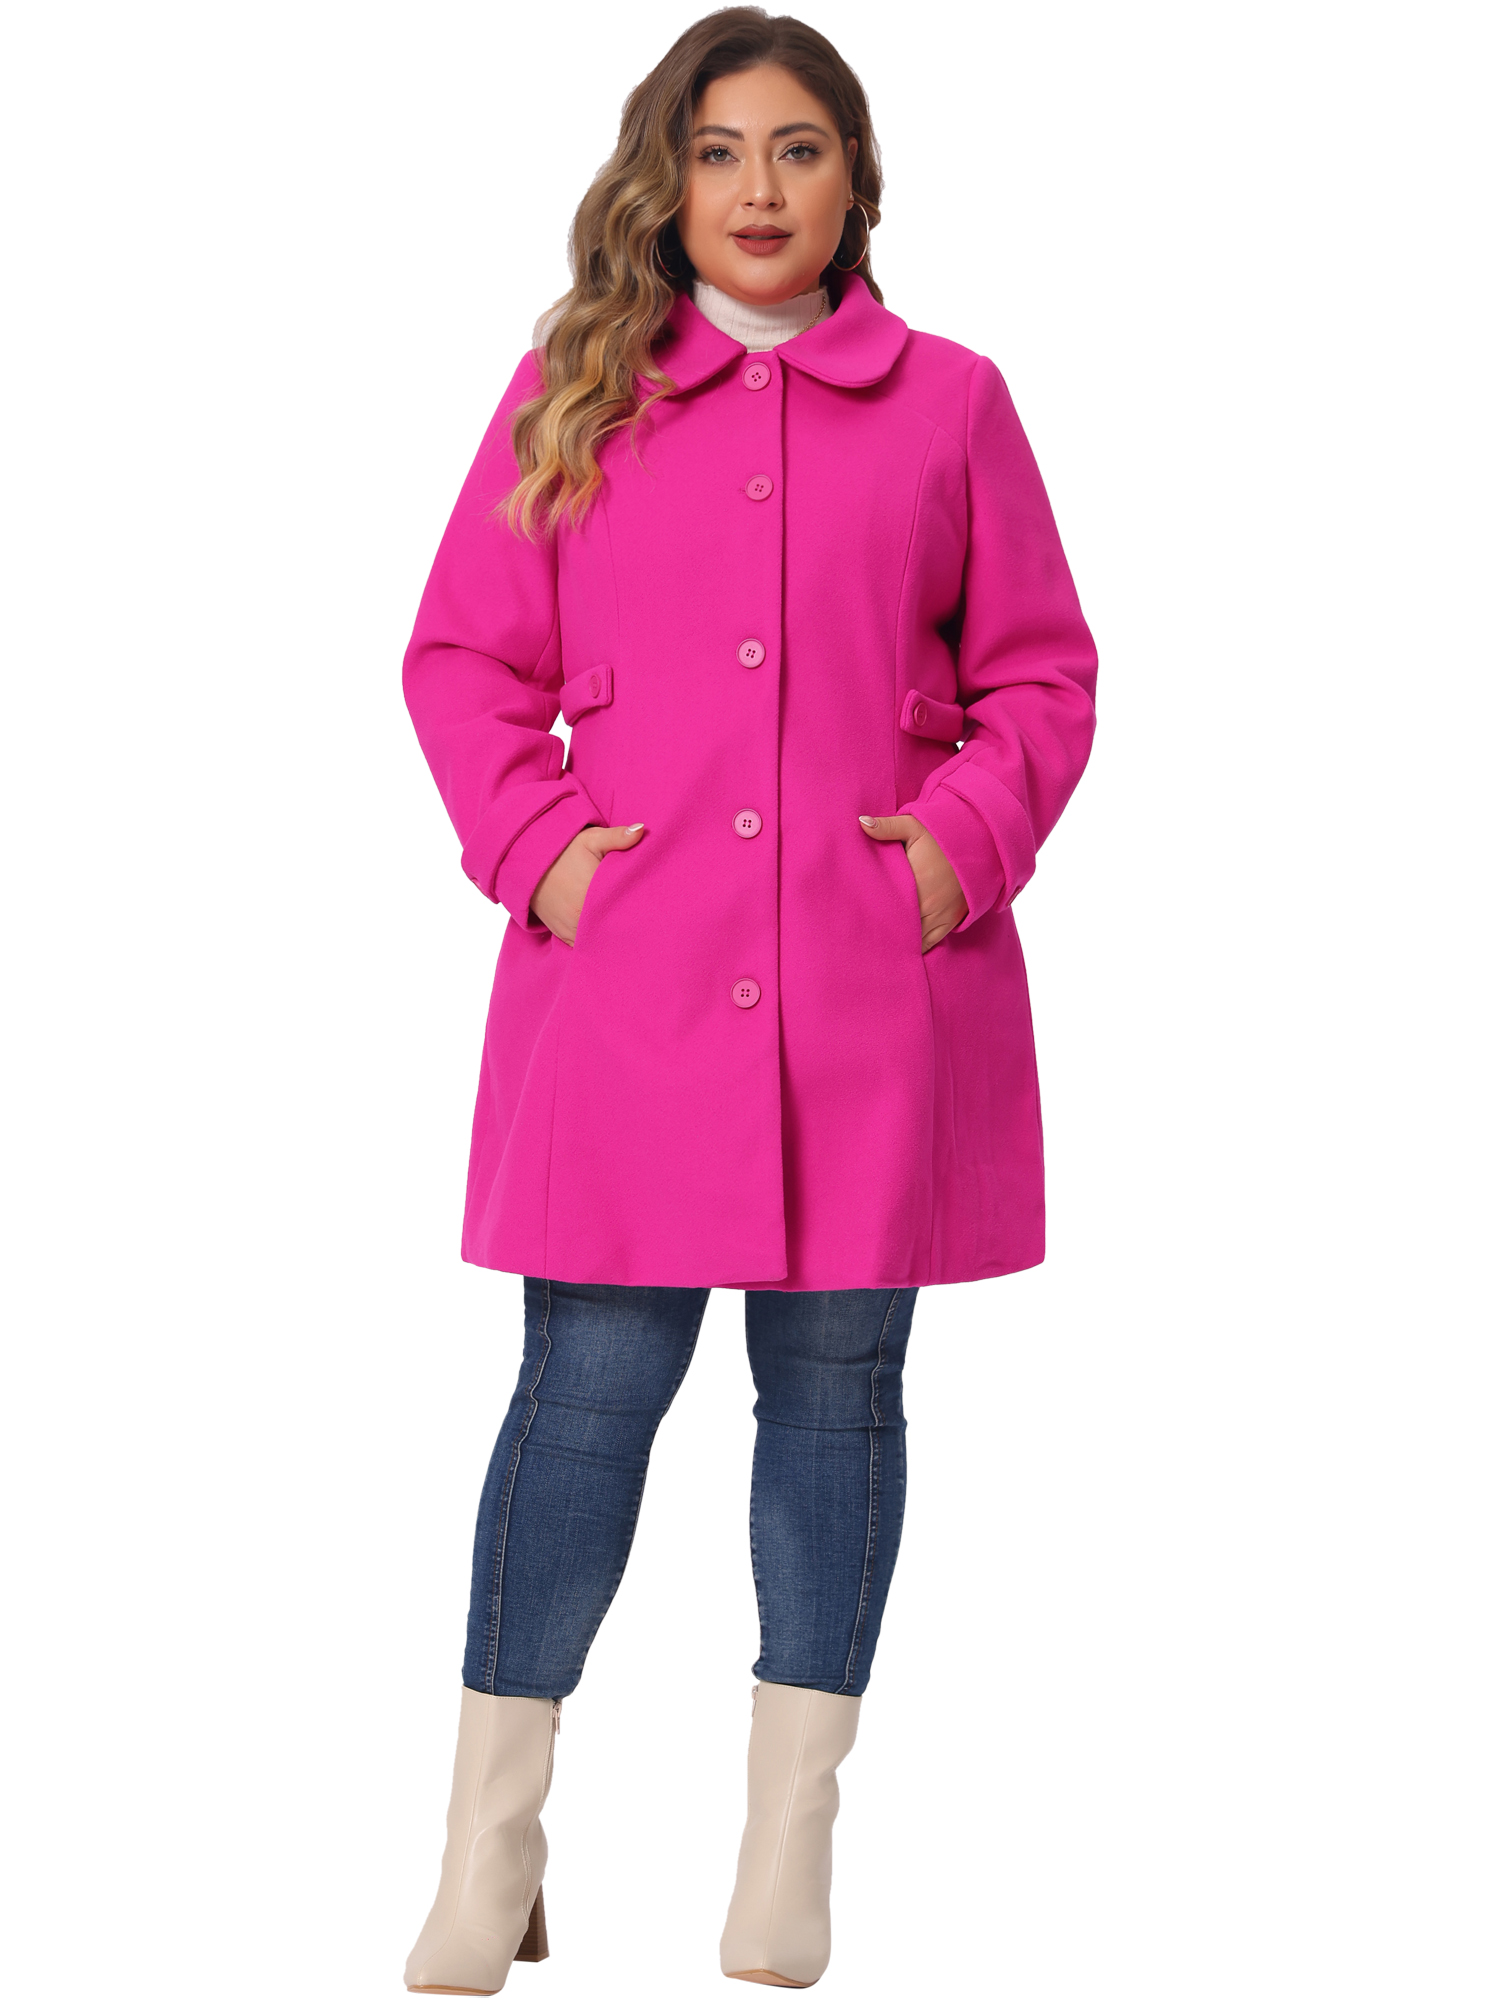 Unique Bargains Plus Size Women's Peacoat Peter Pan Collar Cuff Button Waist Single Breasted Long Wool Coats